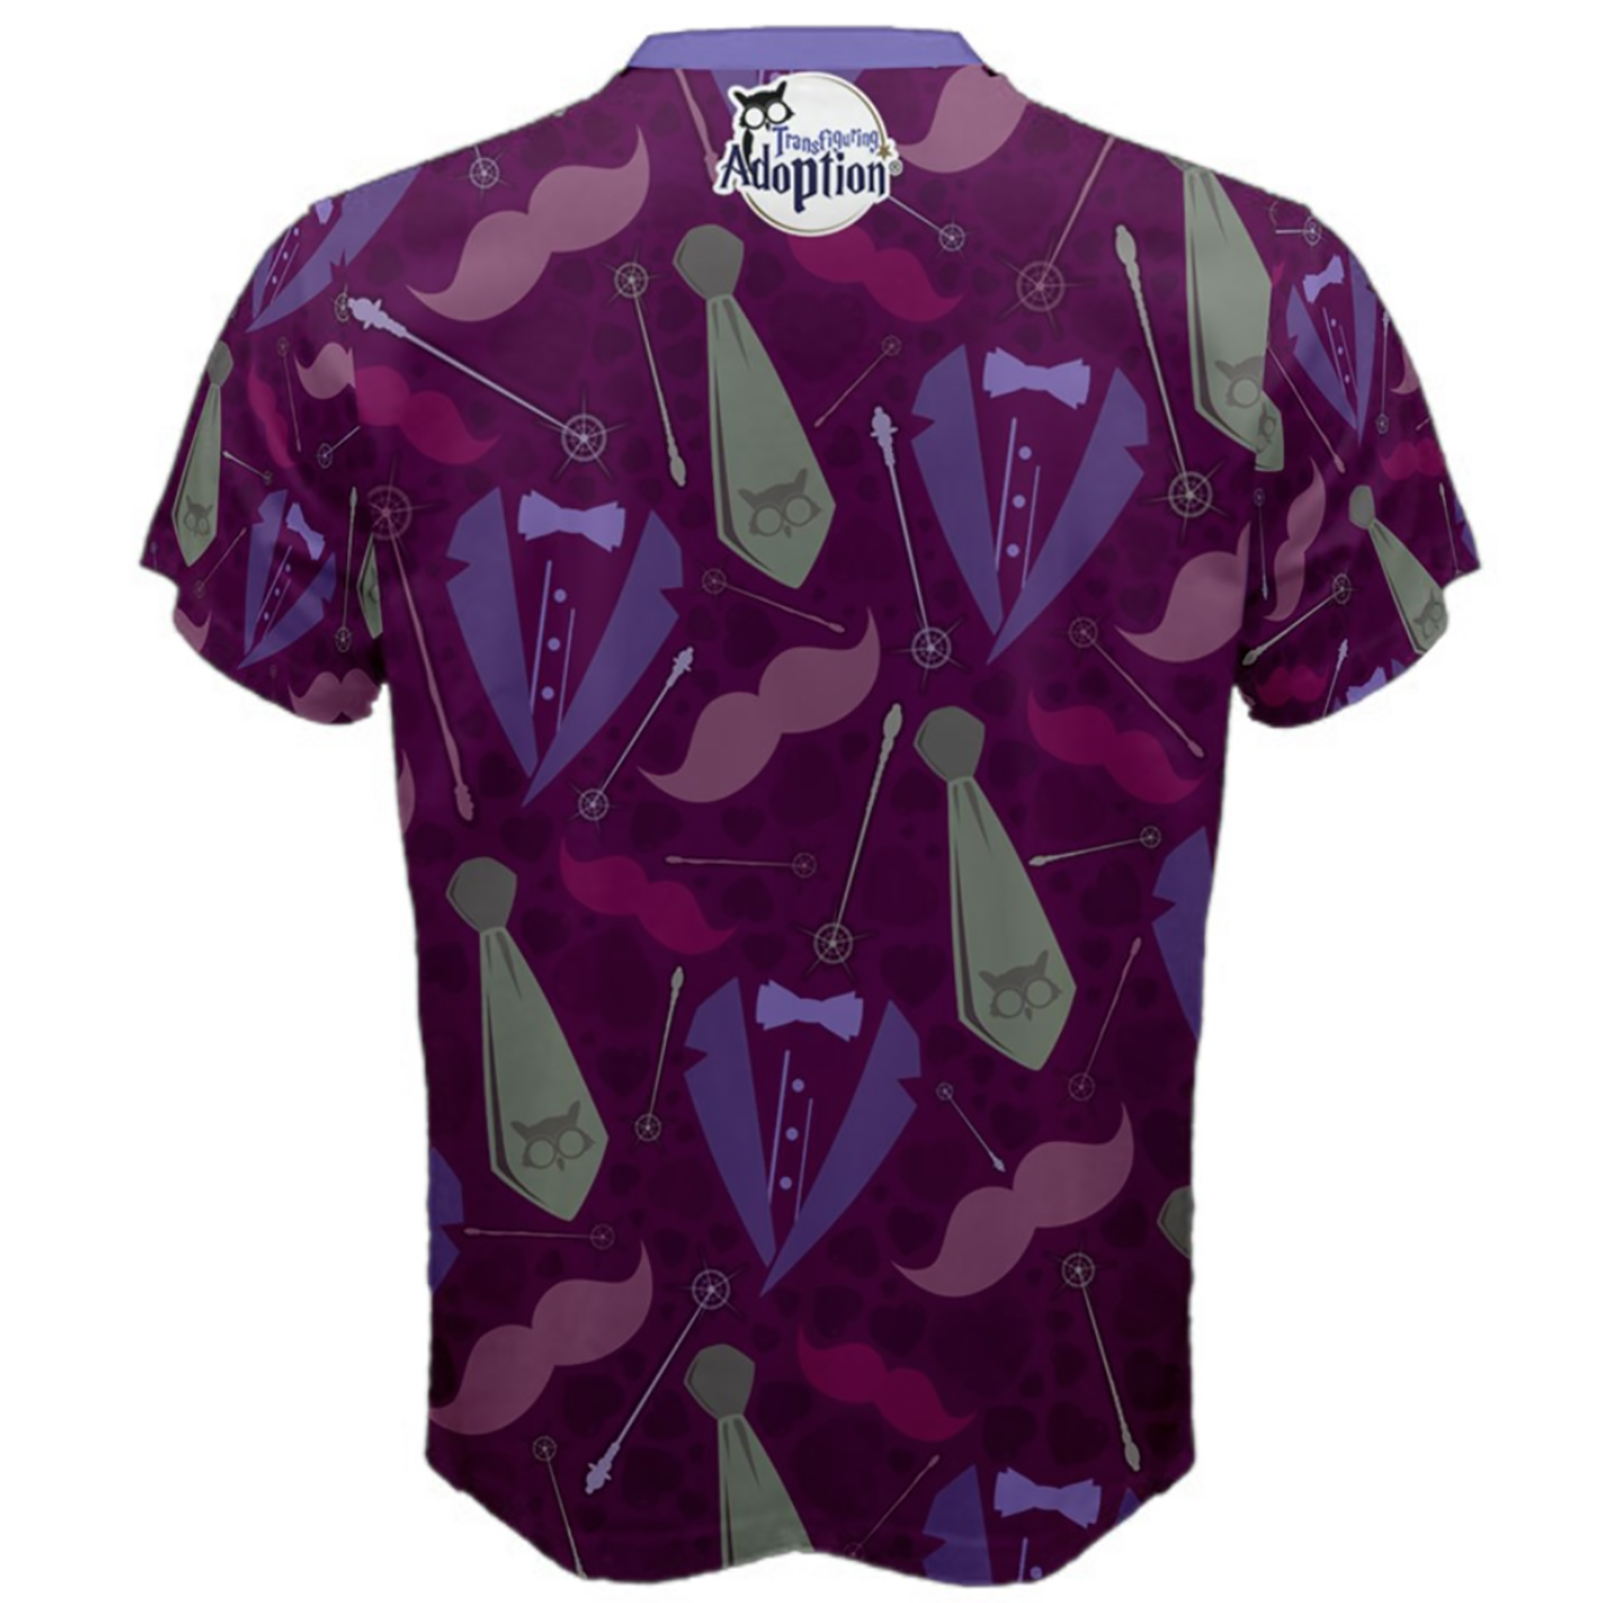 Charming Men's Cotton Tee (Patterned)